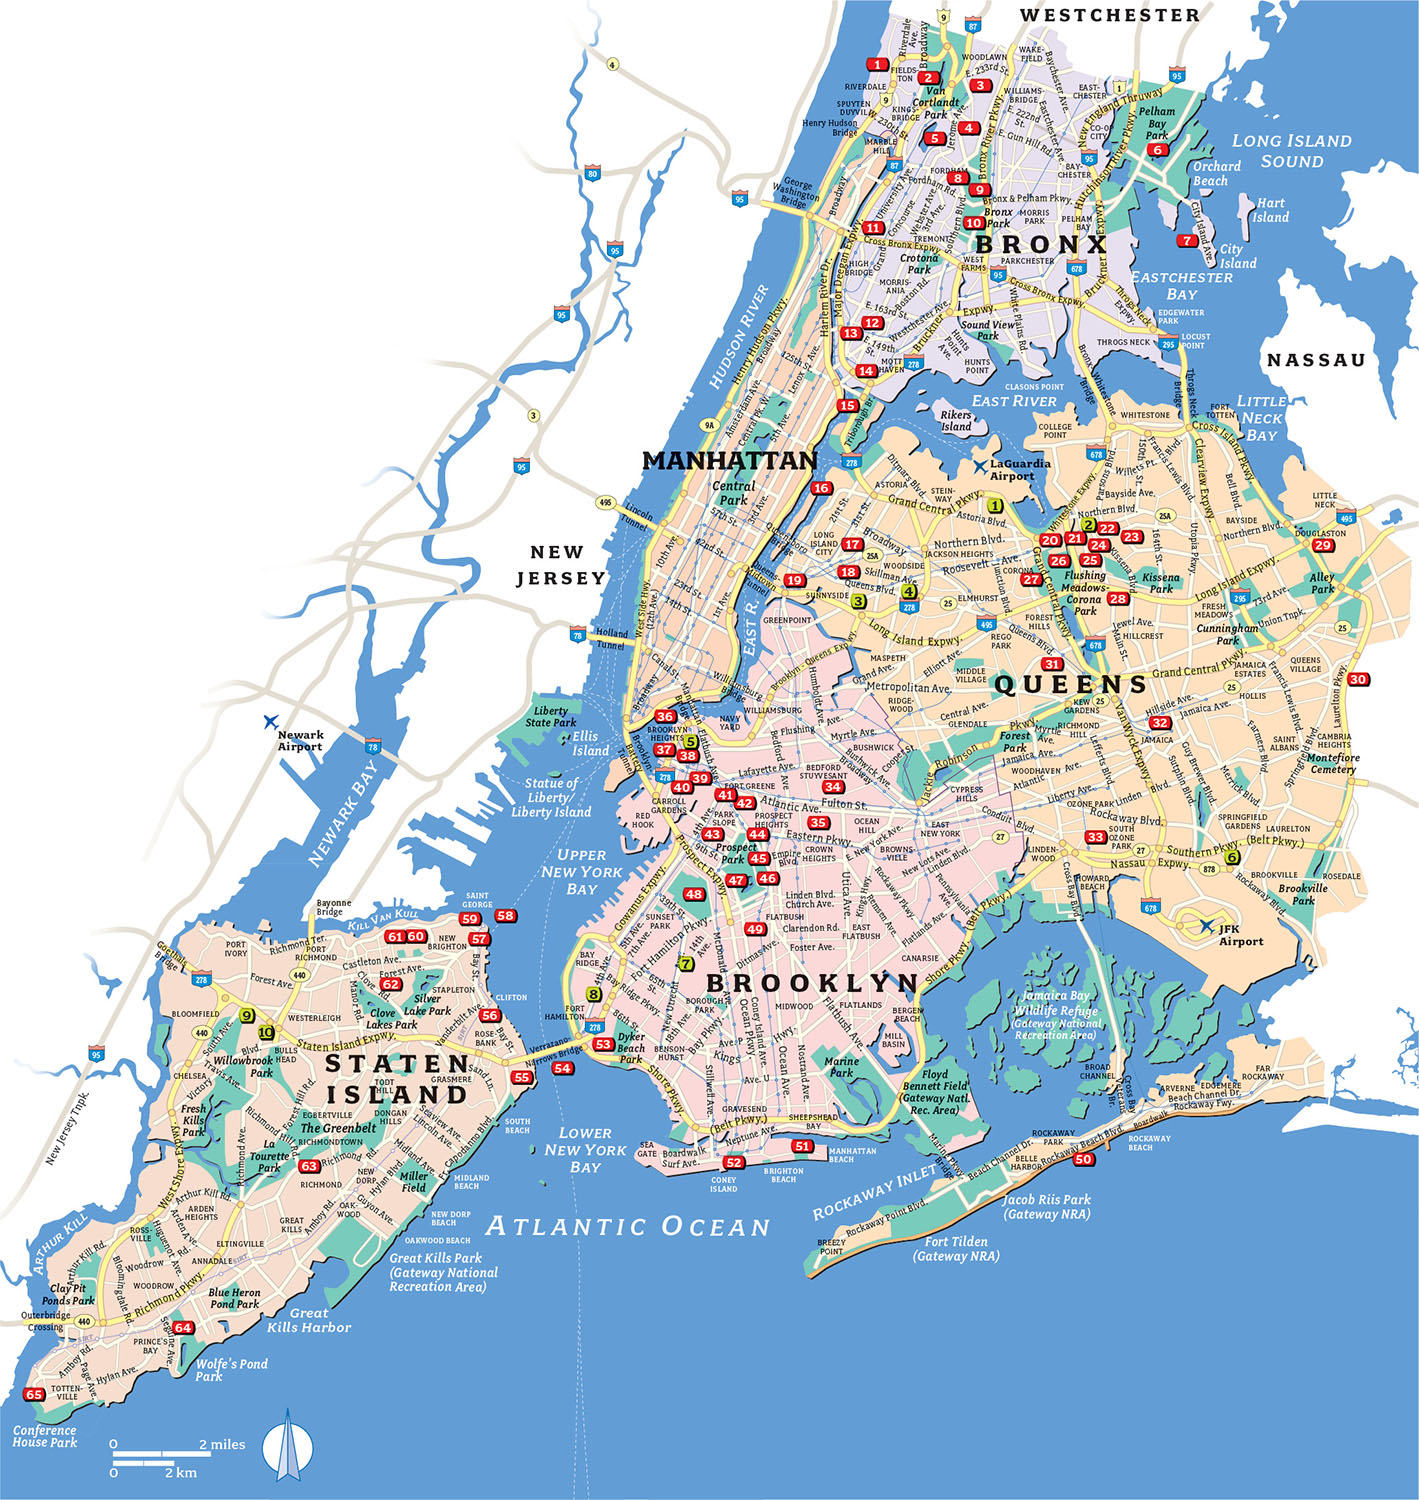 Maps for Travel Guides—NYCVB & Others — David Lindroth Maps